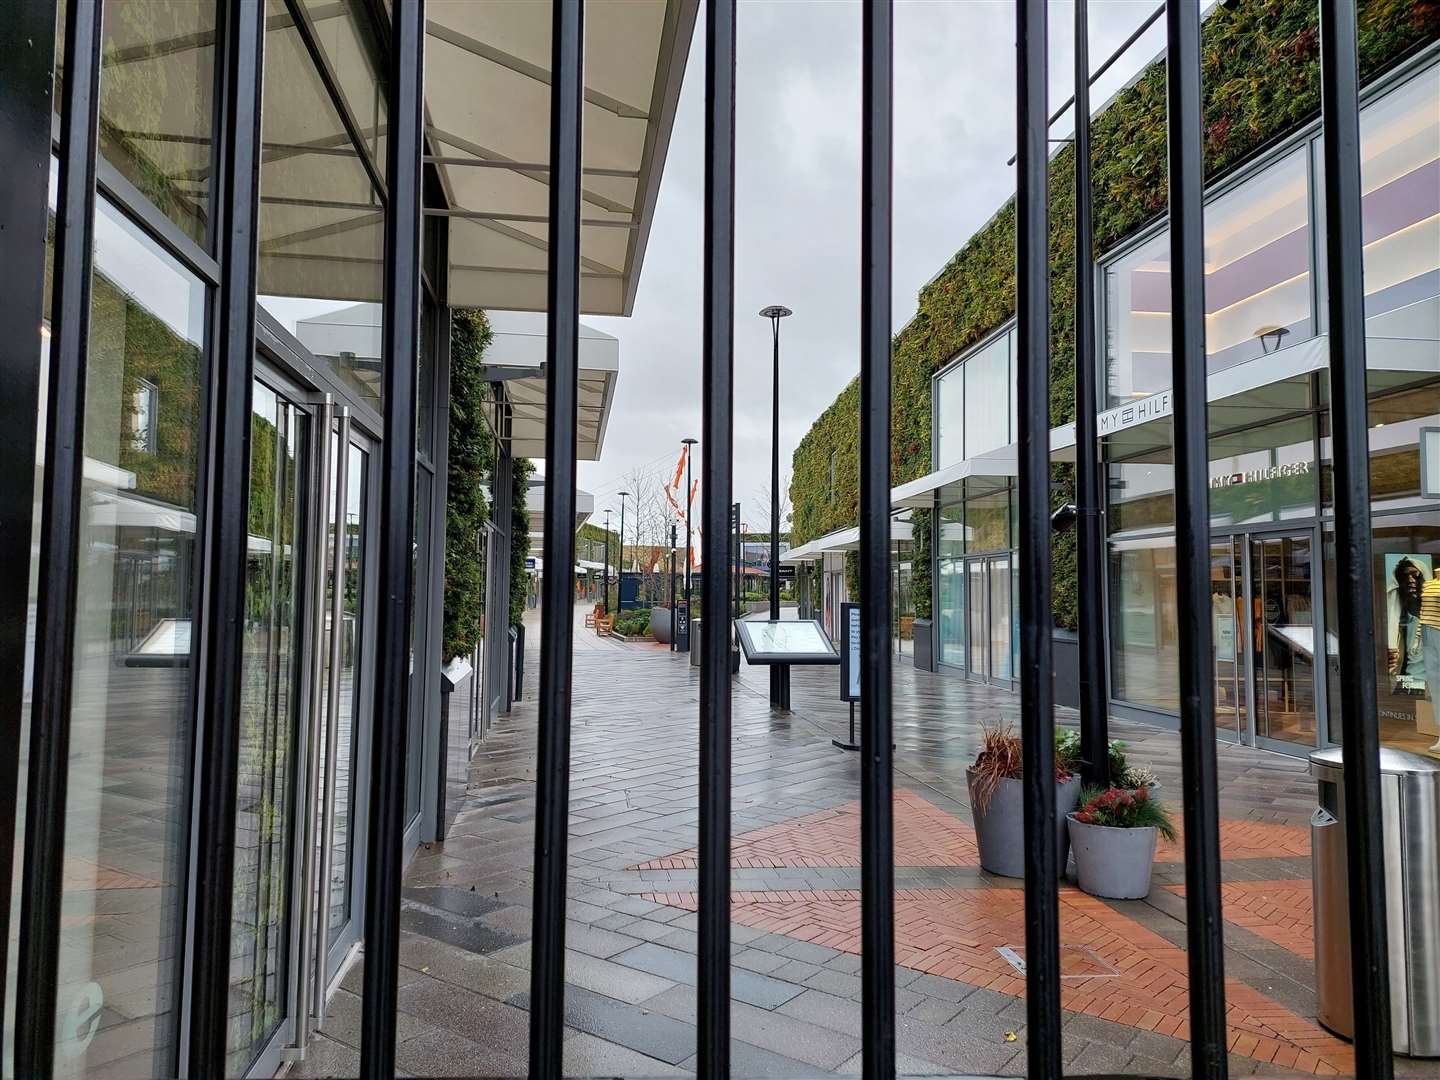 Gates will remain closed at the Designer Outlet on Monday